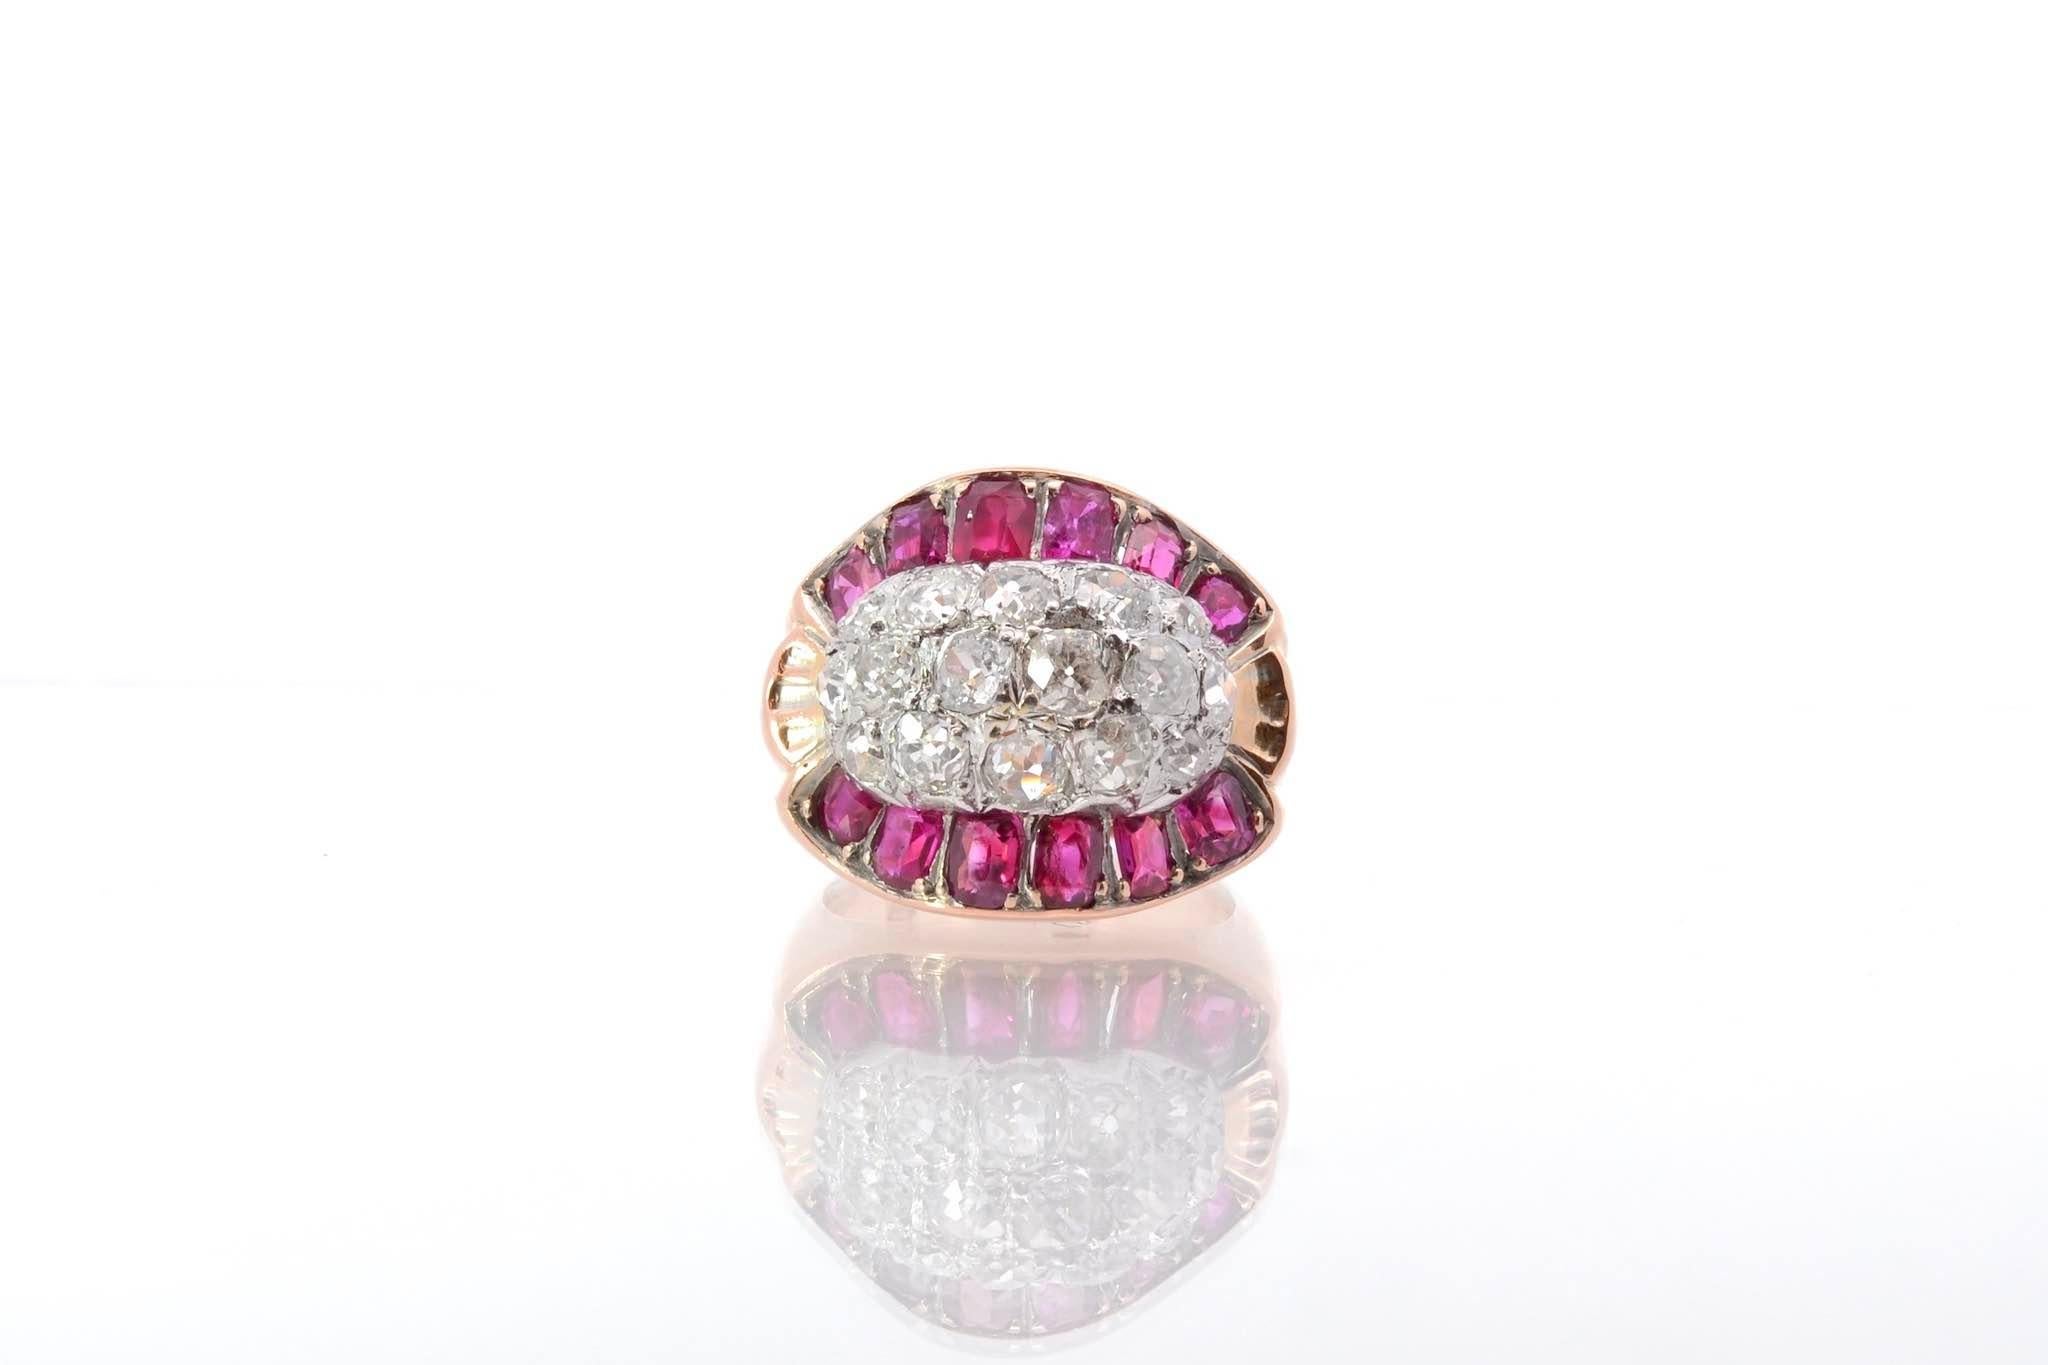 Stones: 16 old cut diamonds: 2.20 cts and 12 calibrated rubies: 2.70 cts
Material: 18k rose gold
Weight: 10.2g
Period: 1940
Size: 50 (free sizing)
Certificate
Ref. : 25546